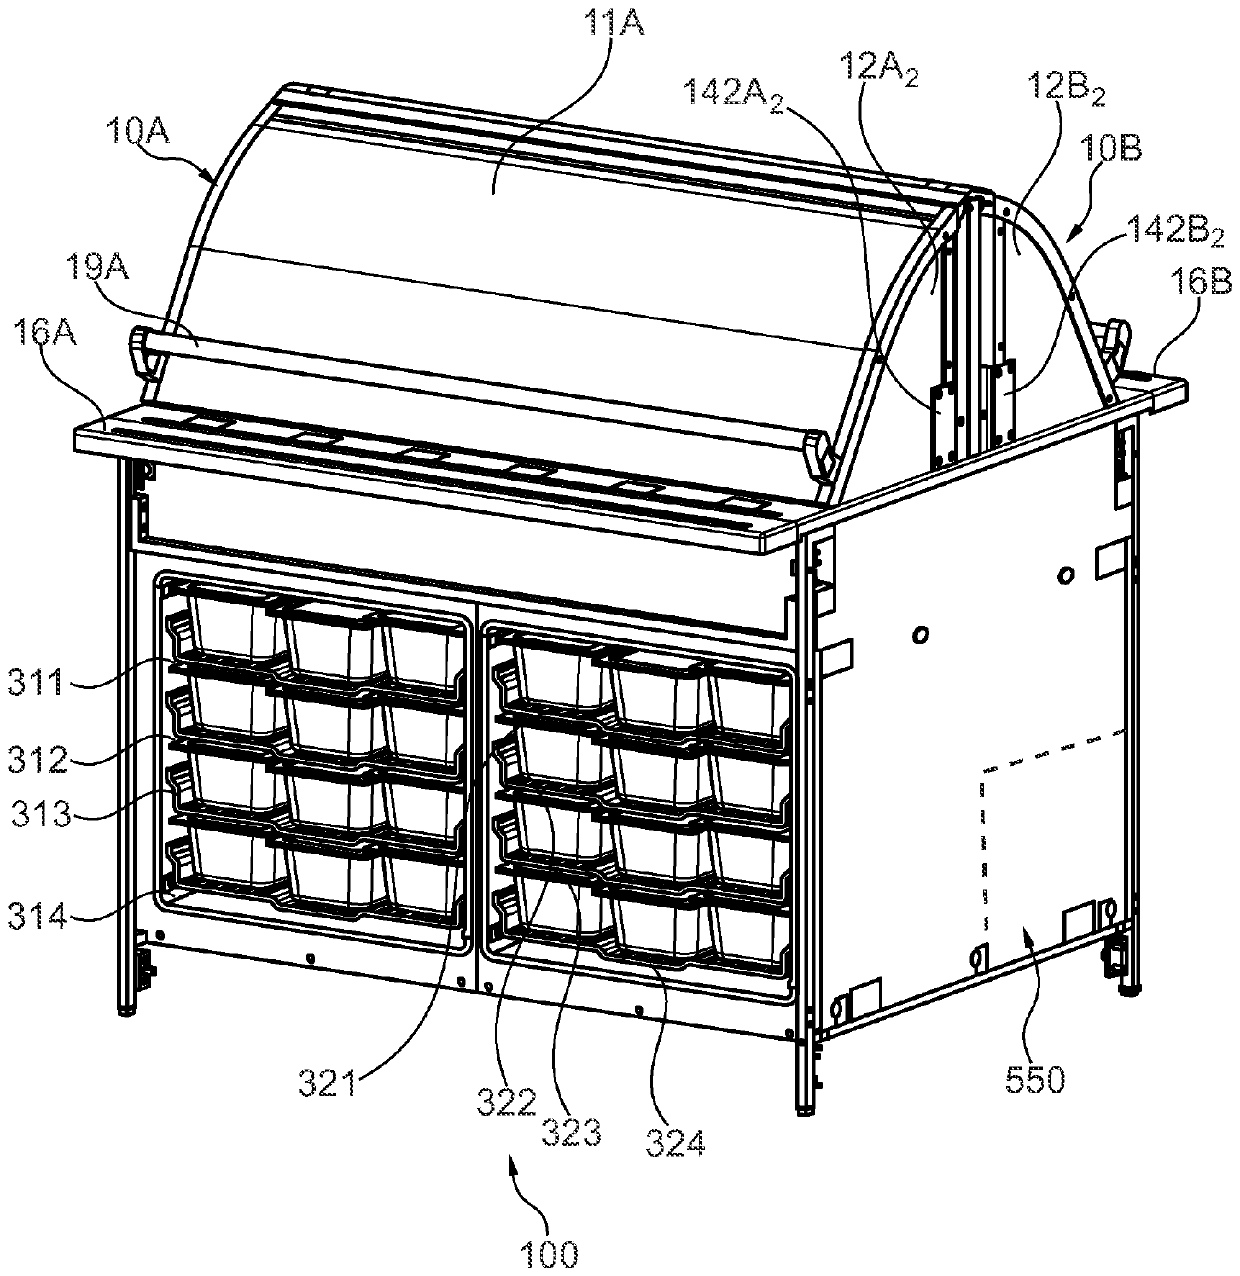 Improved refrigerated food station apparatus and cooling system for cooling the food station